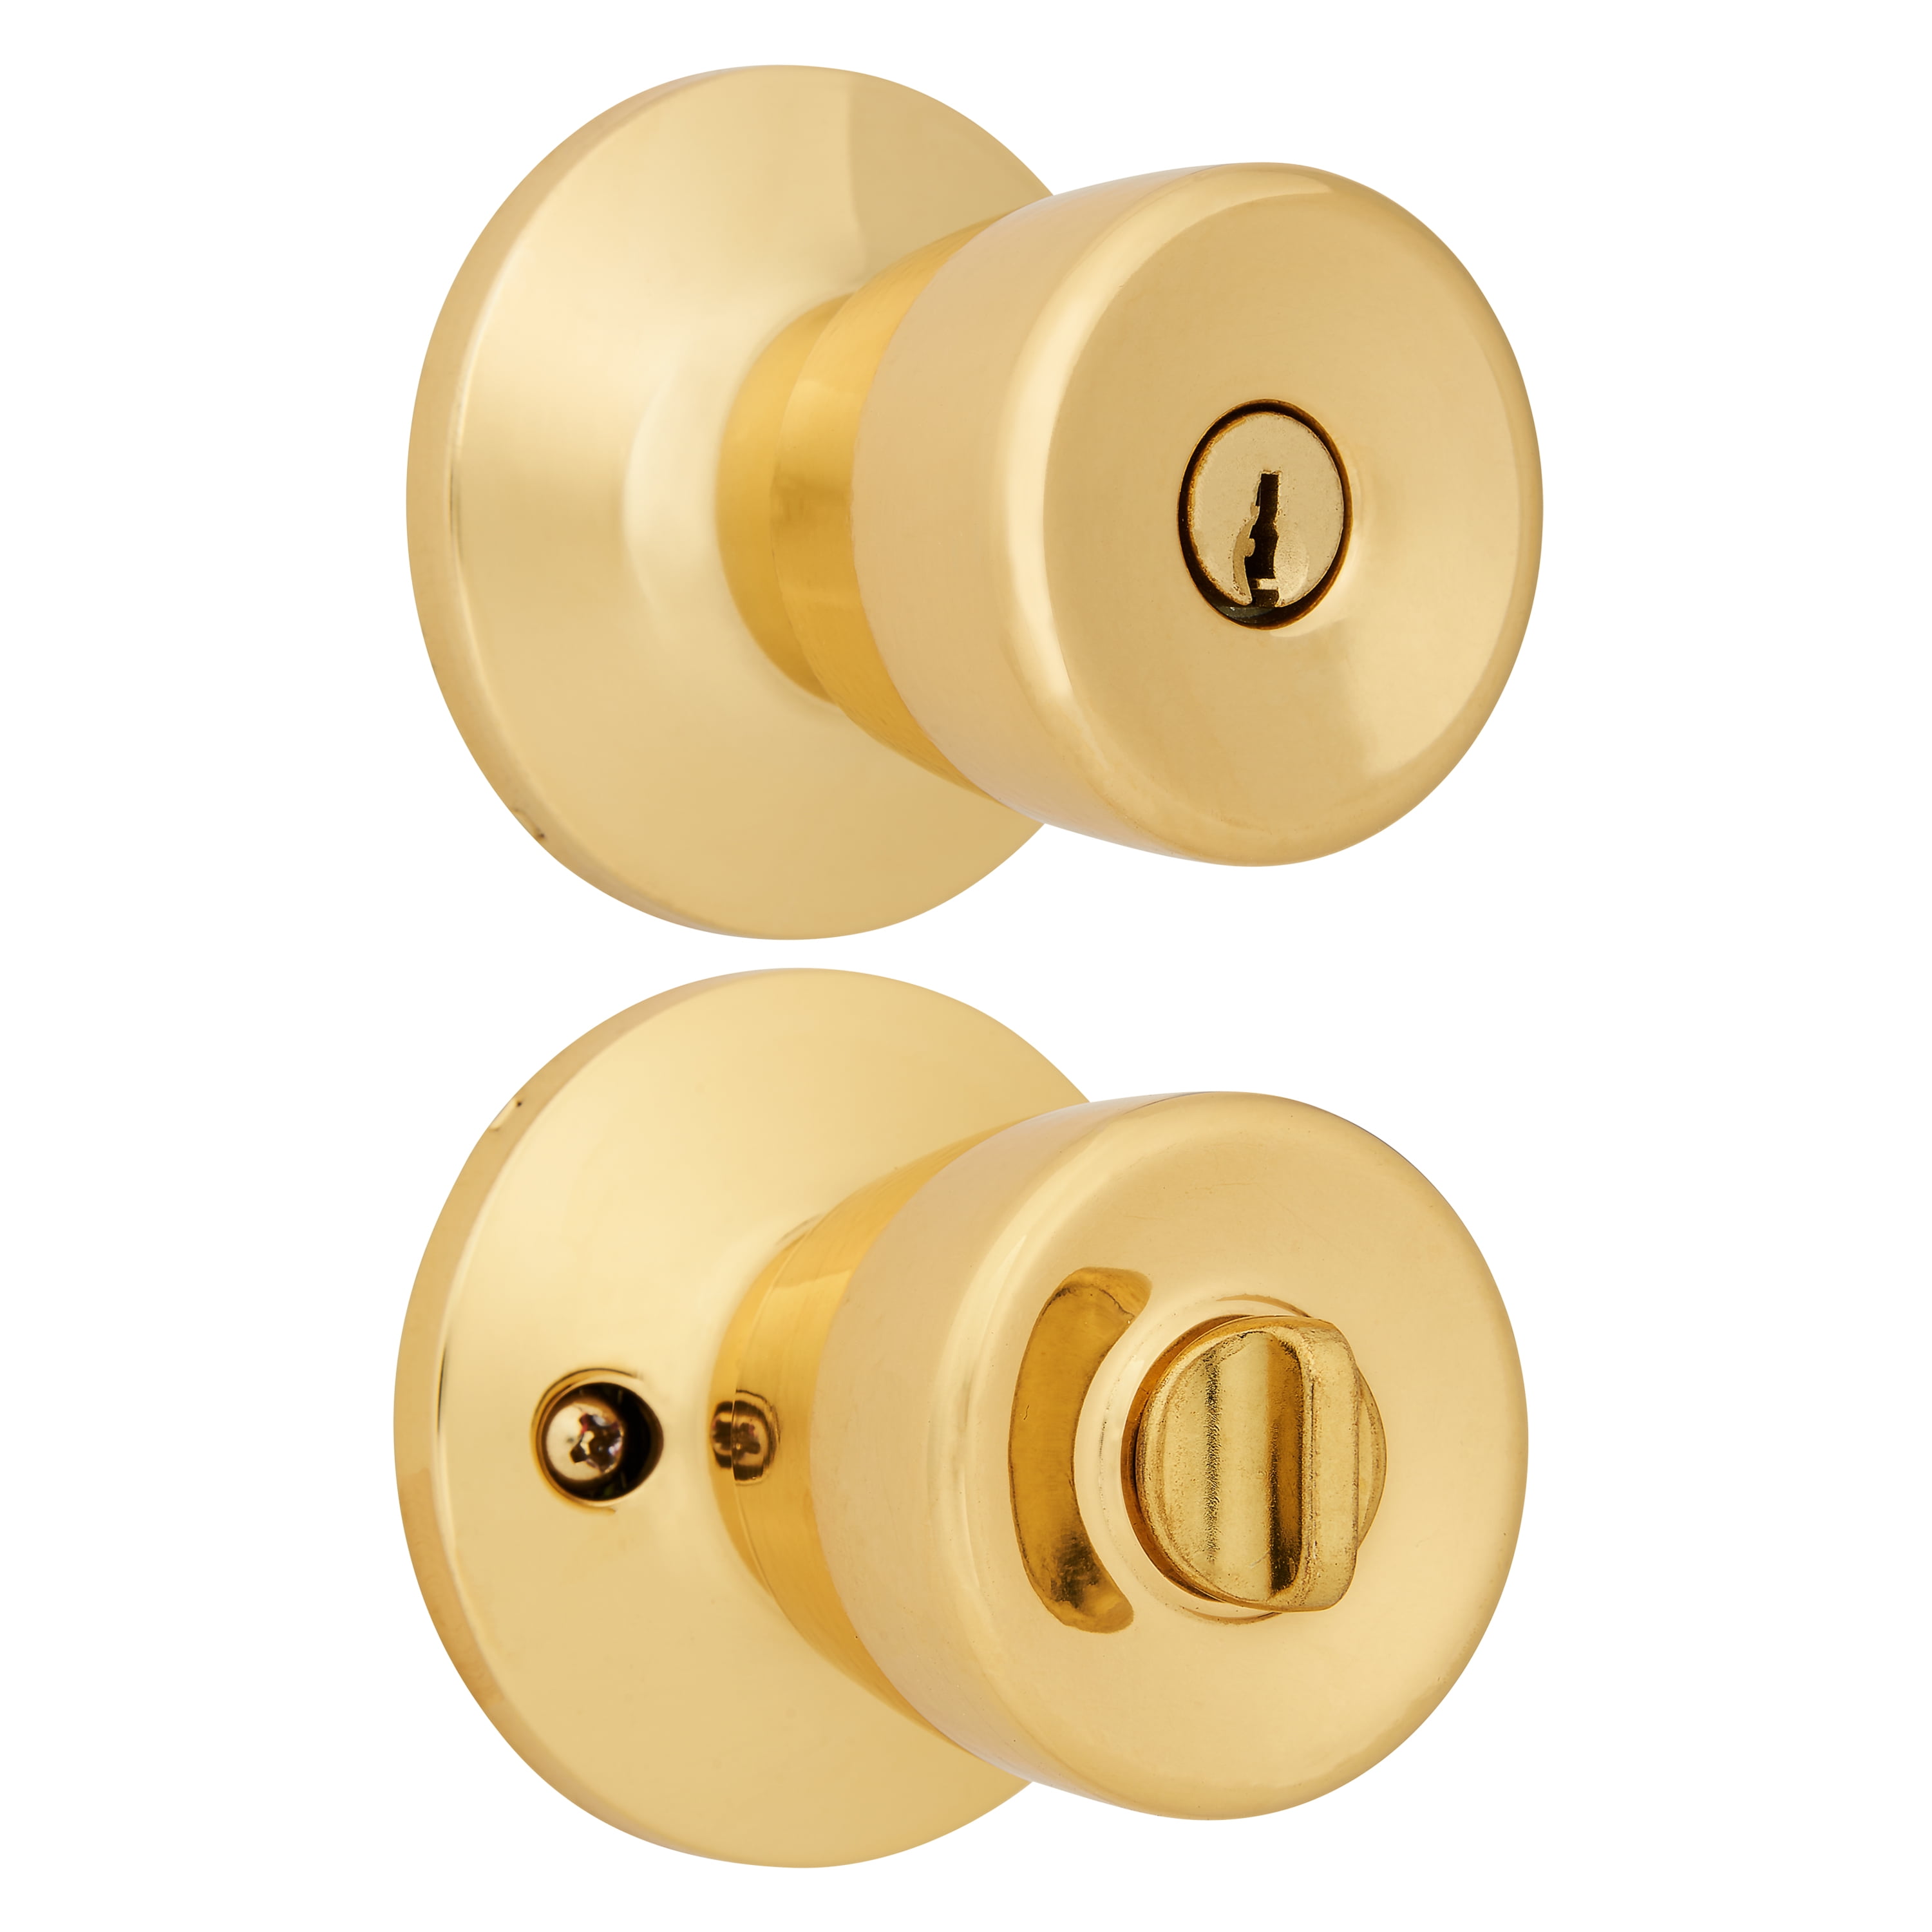 Brinks 2711-109 Bell Style Door Knob with Privacy Key for Bedroom and Bath Antique Brass Hampton Products